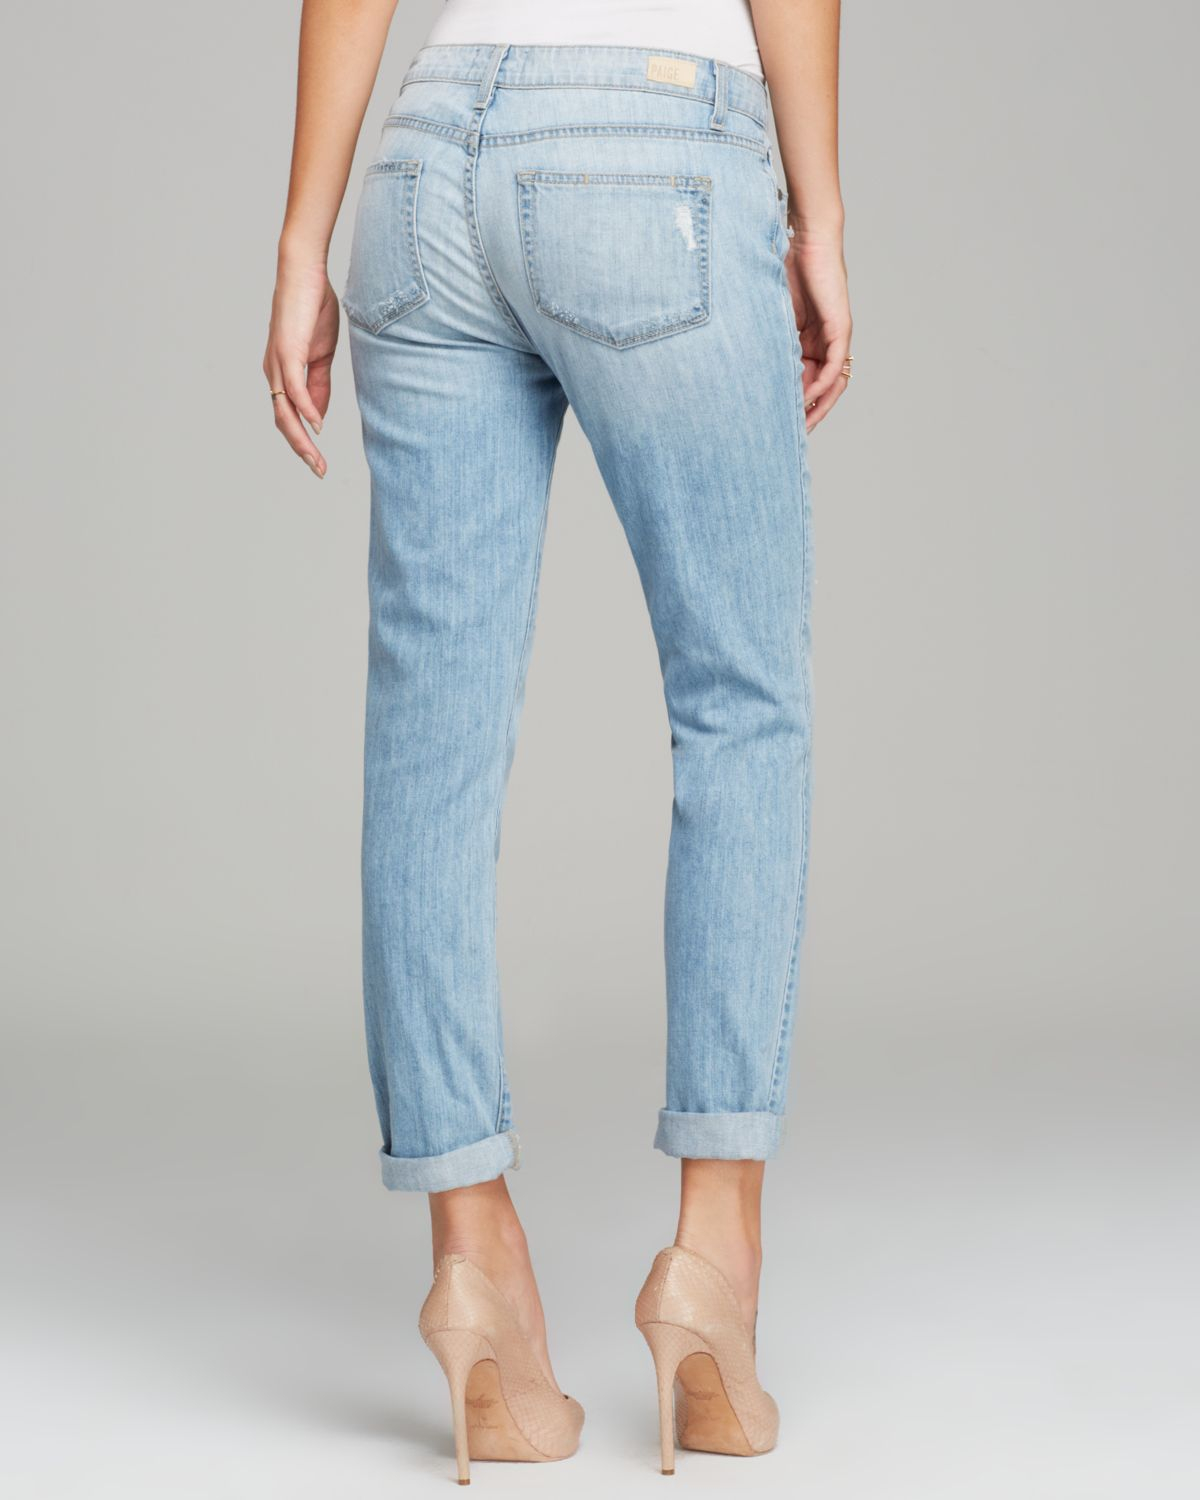 PAIGE Jeans Jimmy Jimmy Skinny Naomi Destructed in Blue - Lyst